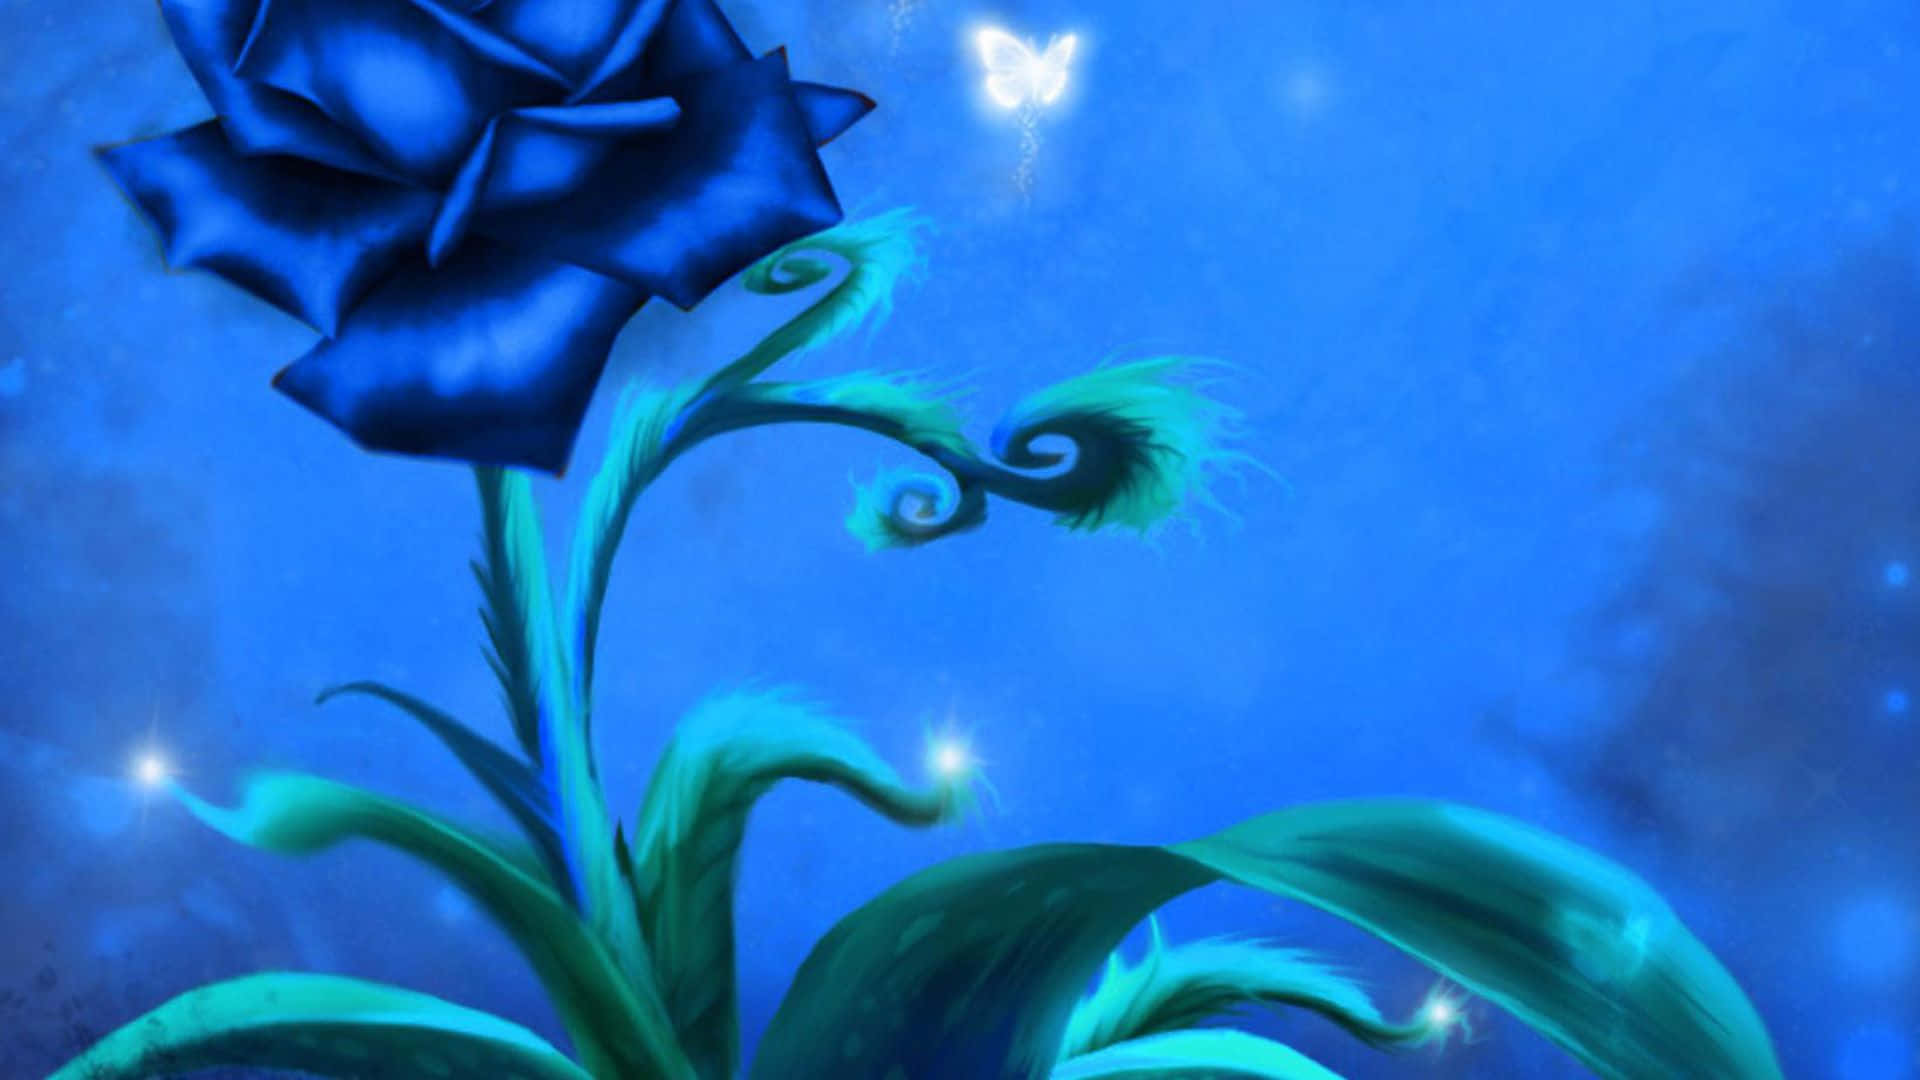 Enchanting Dark Blue Rose in Abstract Expression Wallpaper